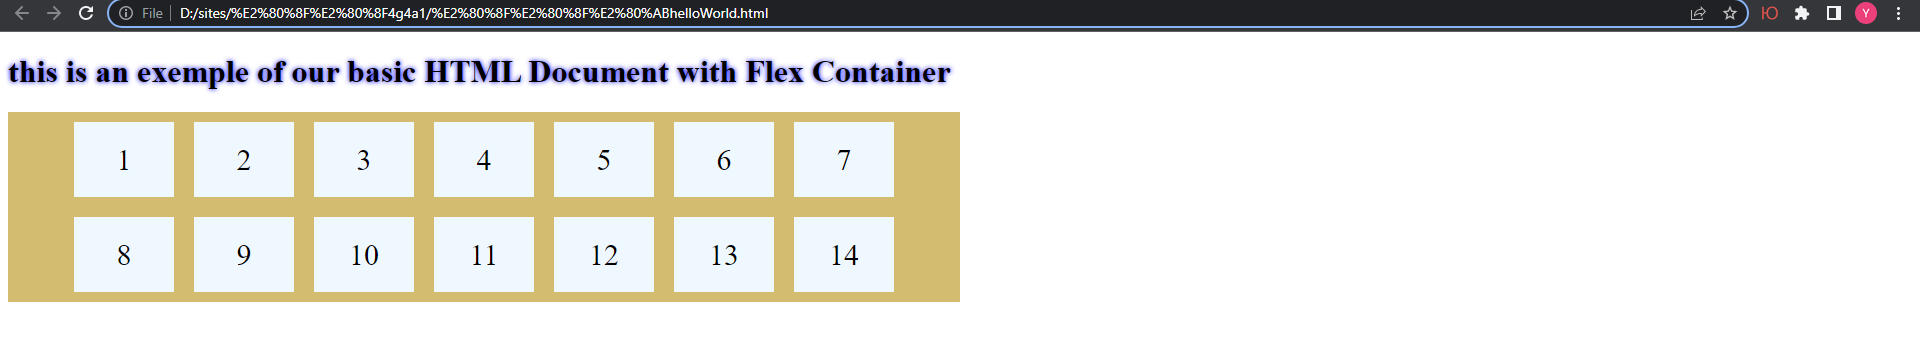 CSS in HTML - Flexbox justify-content